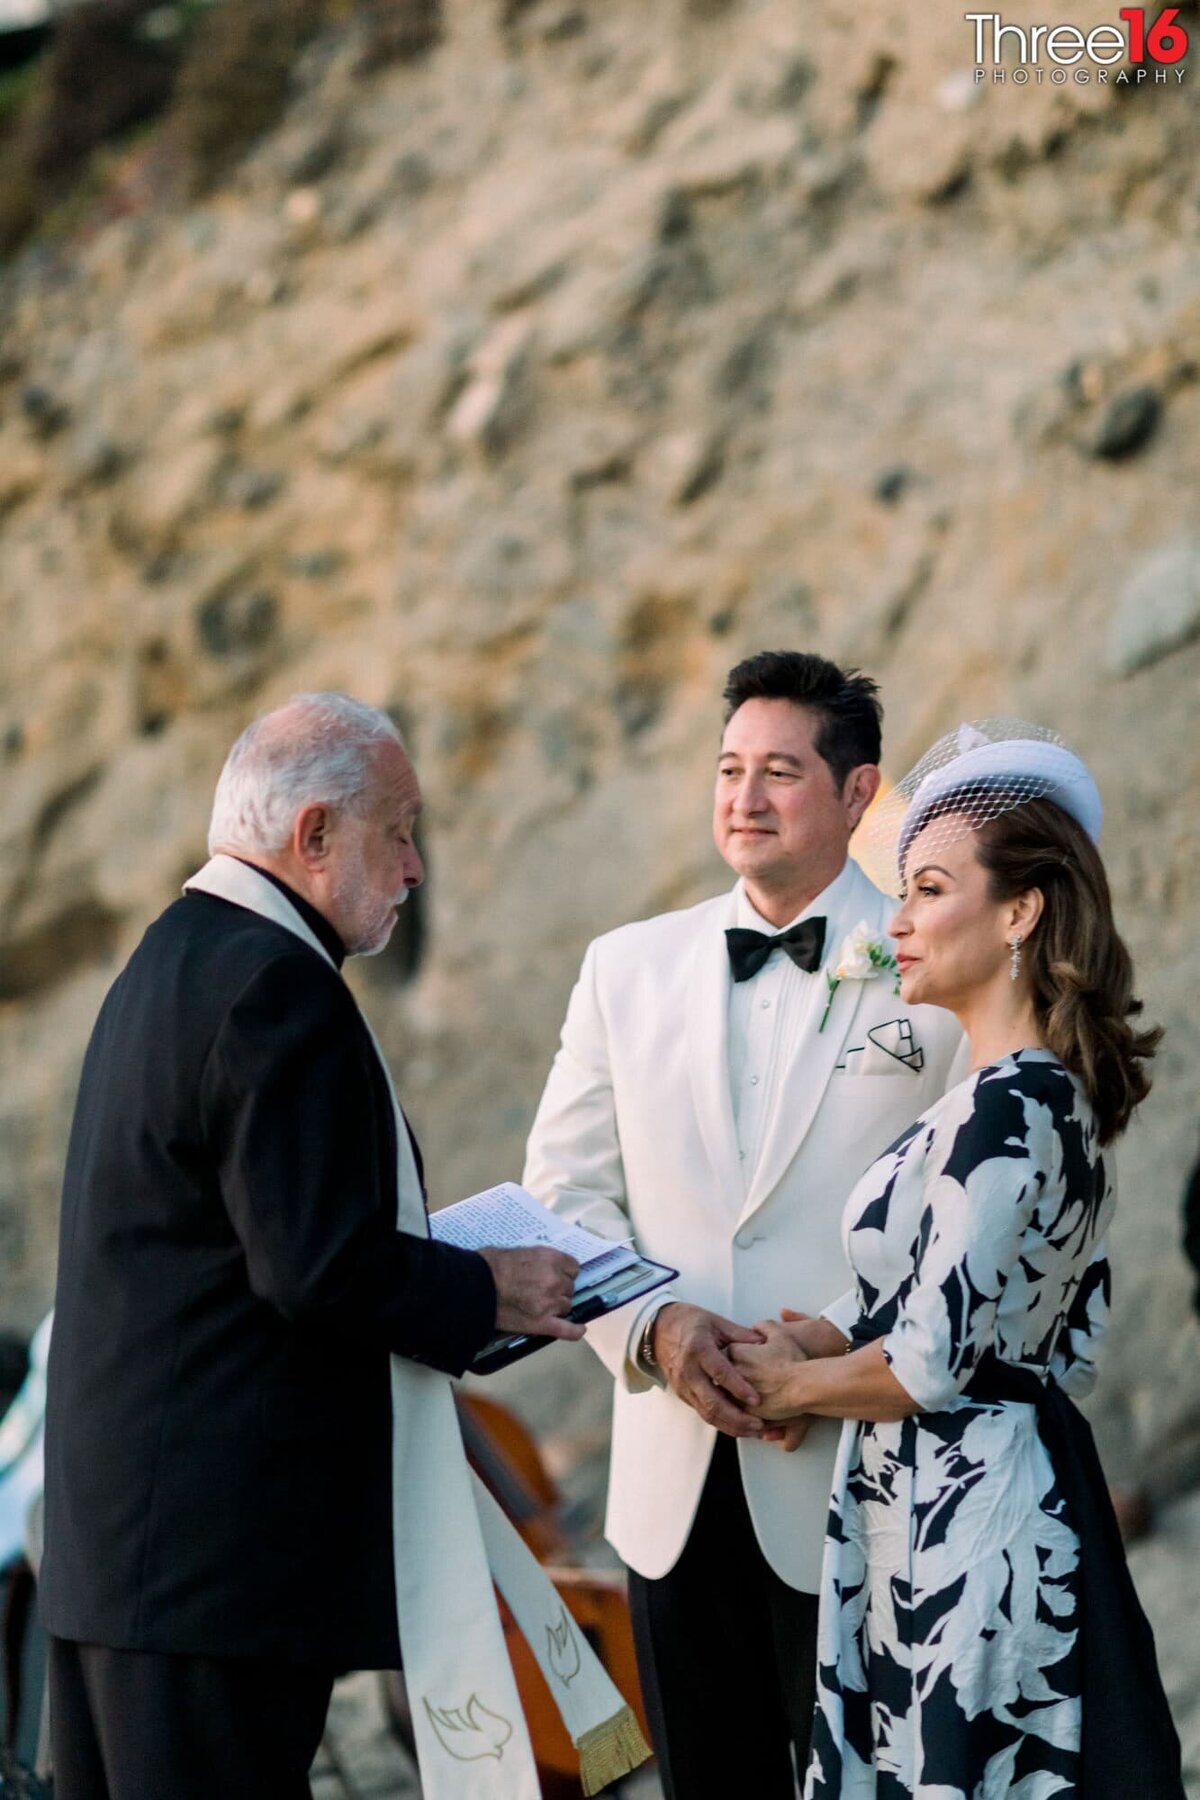 Bride and Groom hold hands as they listen to the officiant during an elopement ceremony on the beach